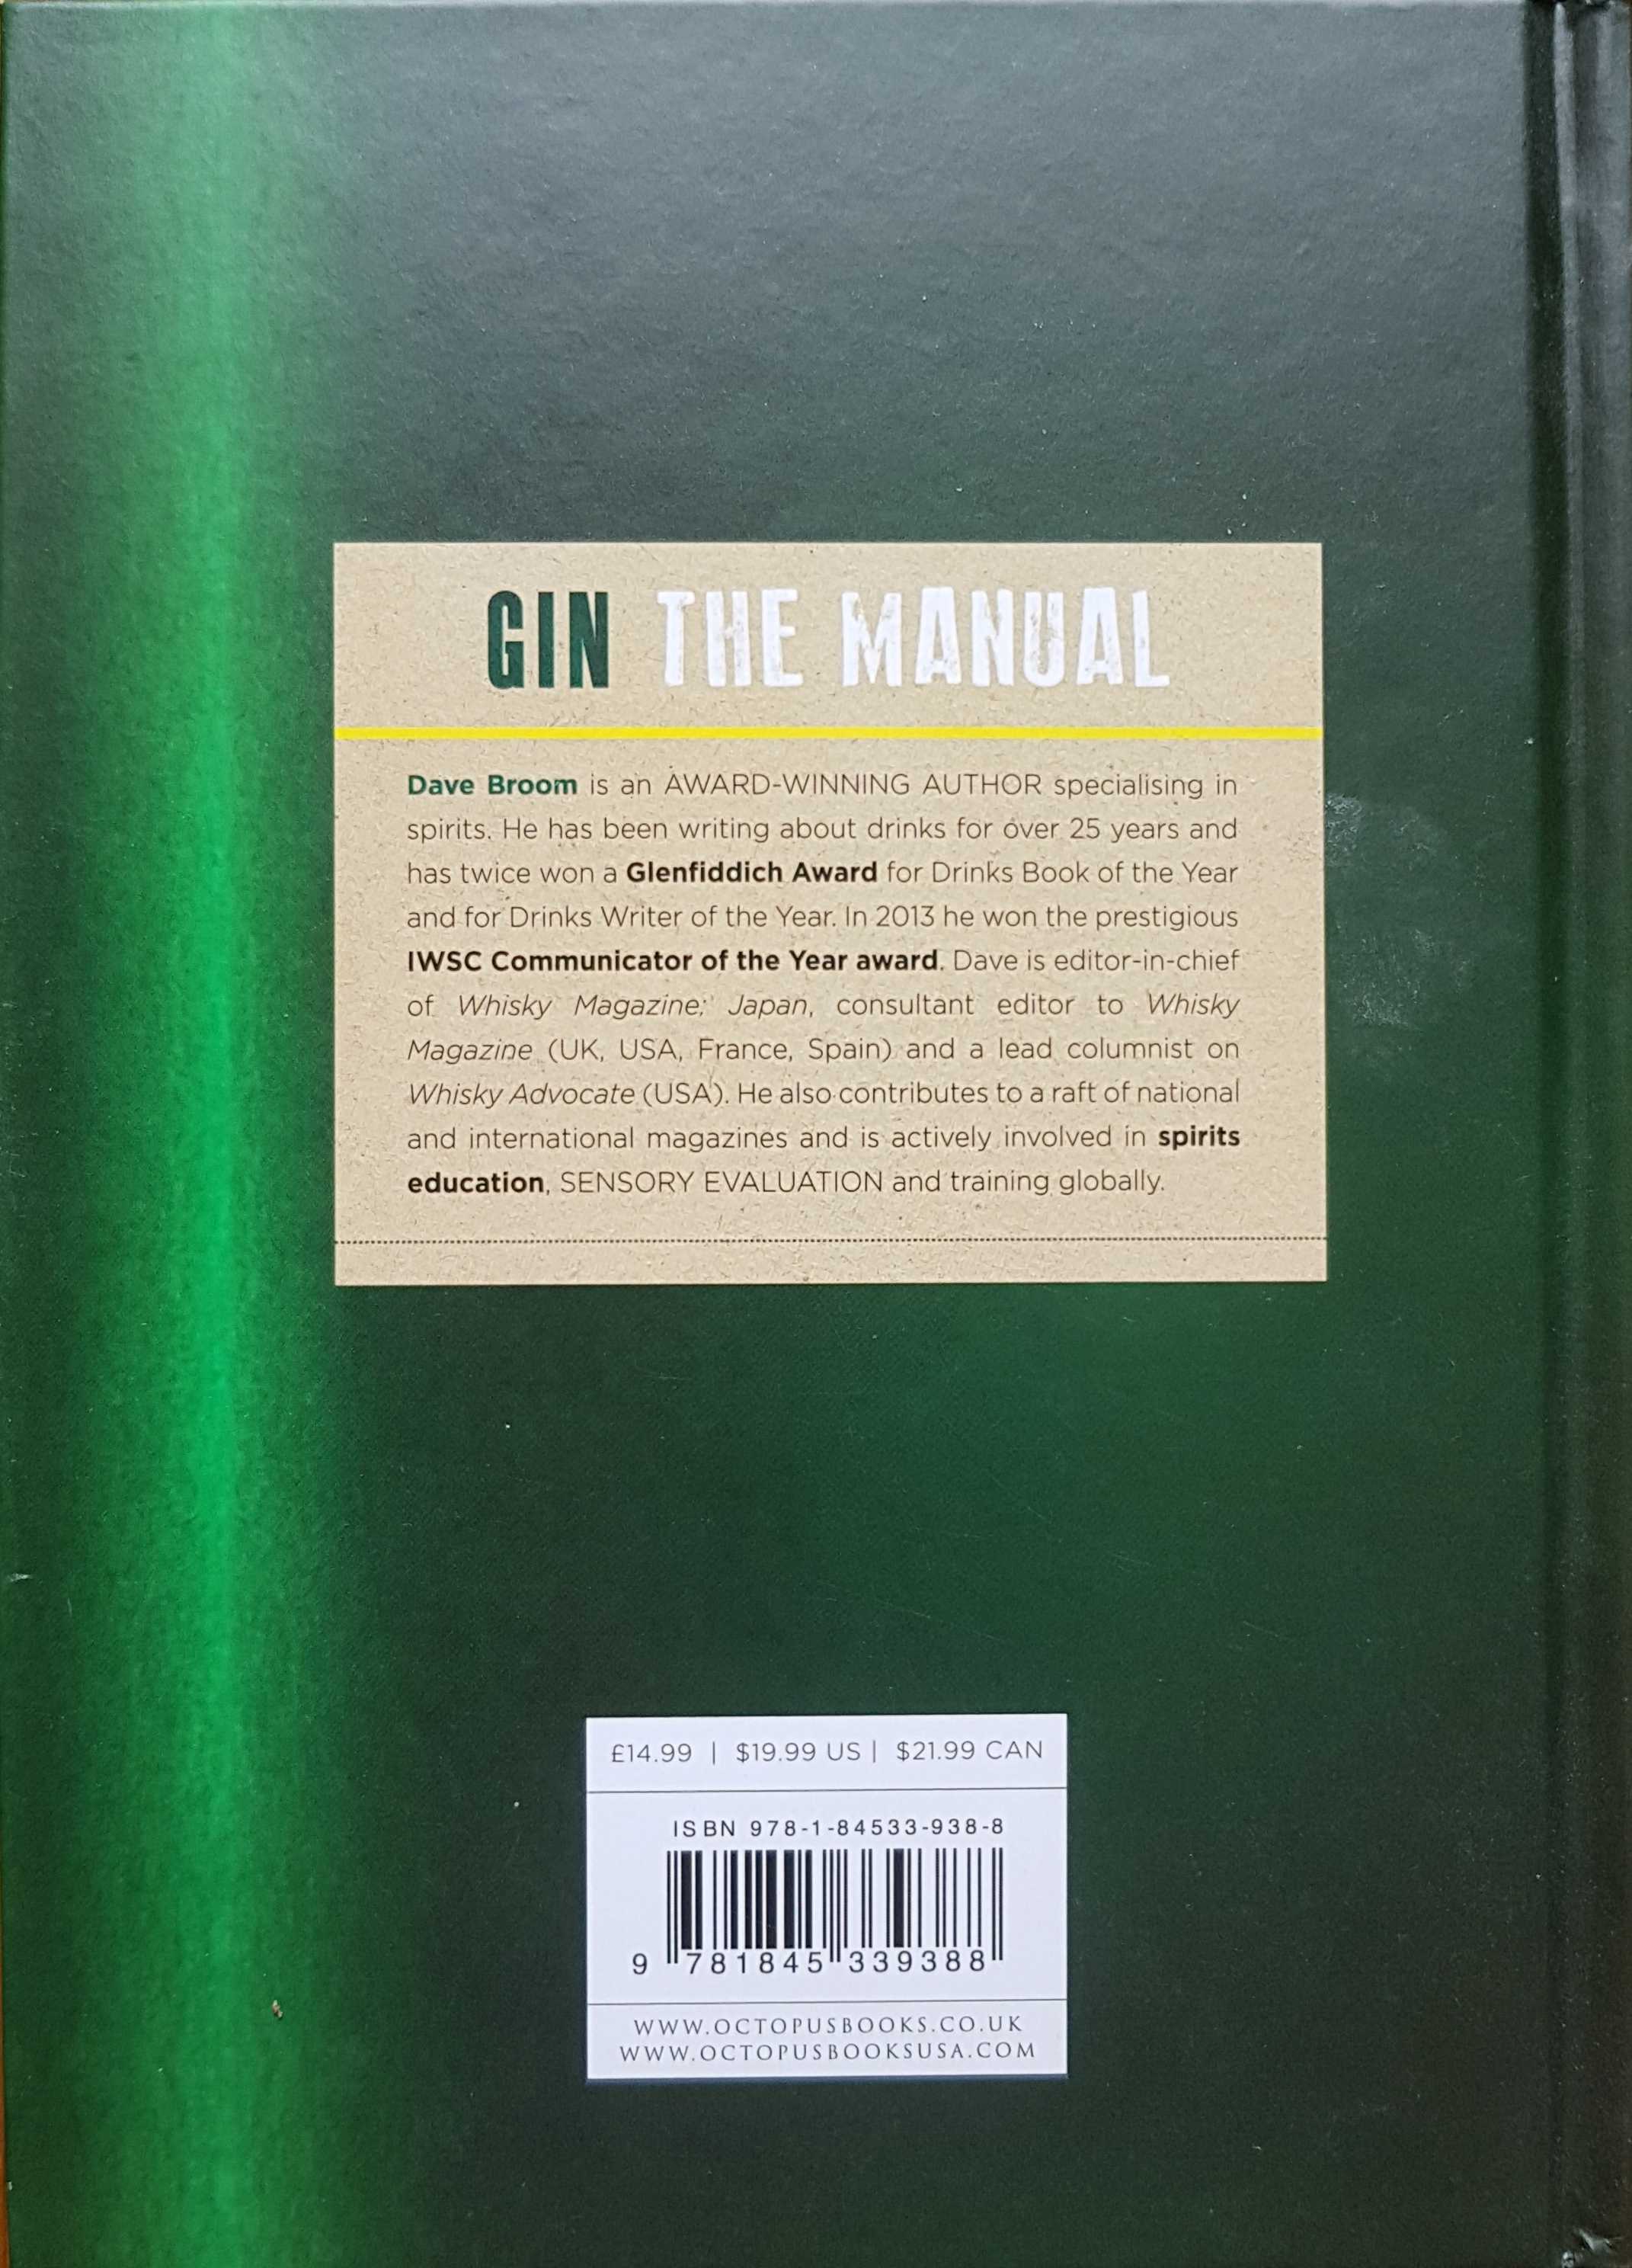 Picture of 978-1-84533-938-8 Gin the manual by artist Dave Broom 